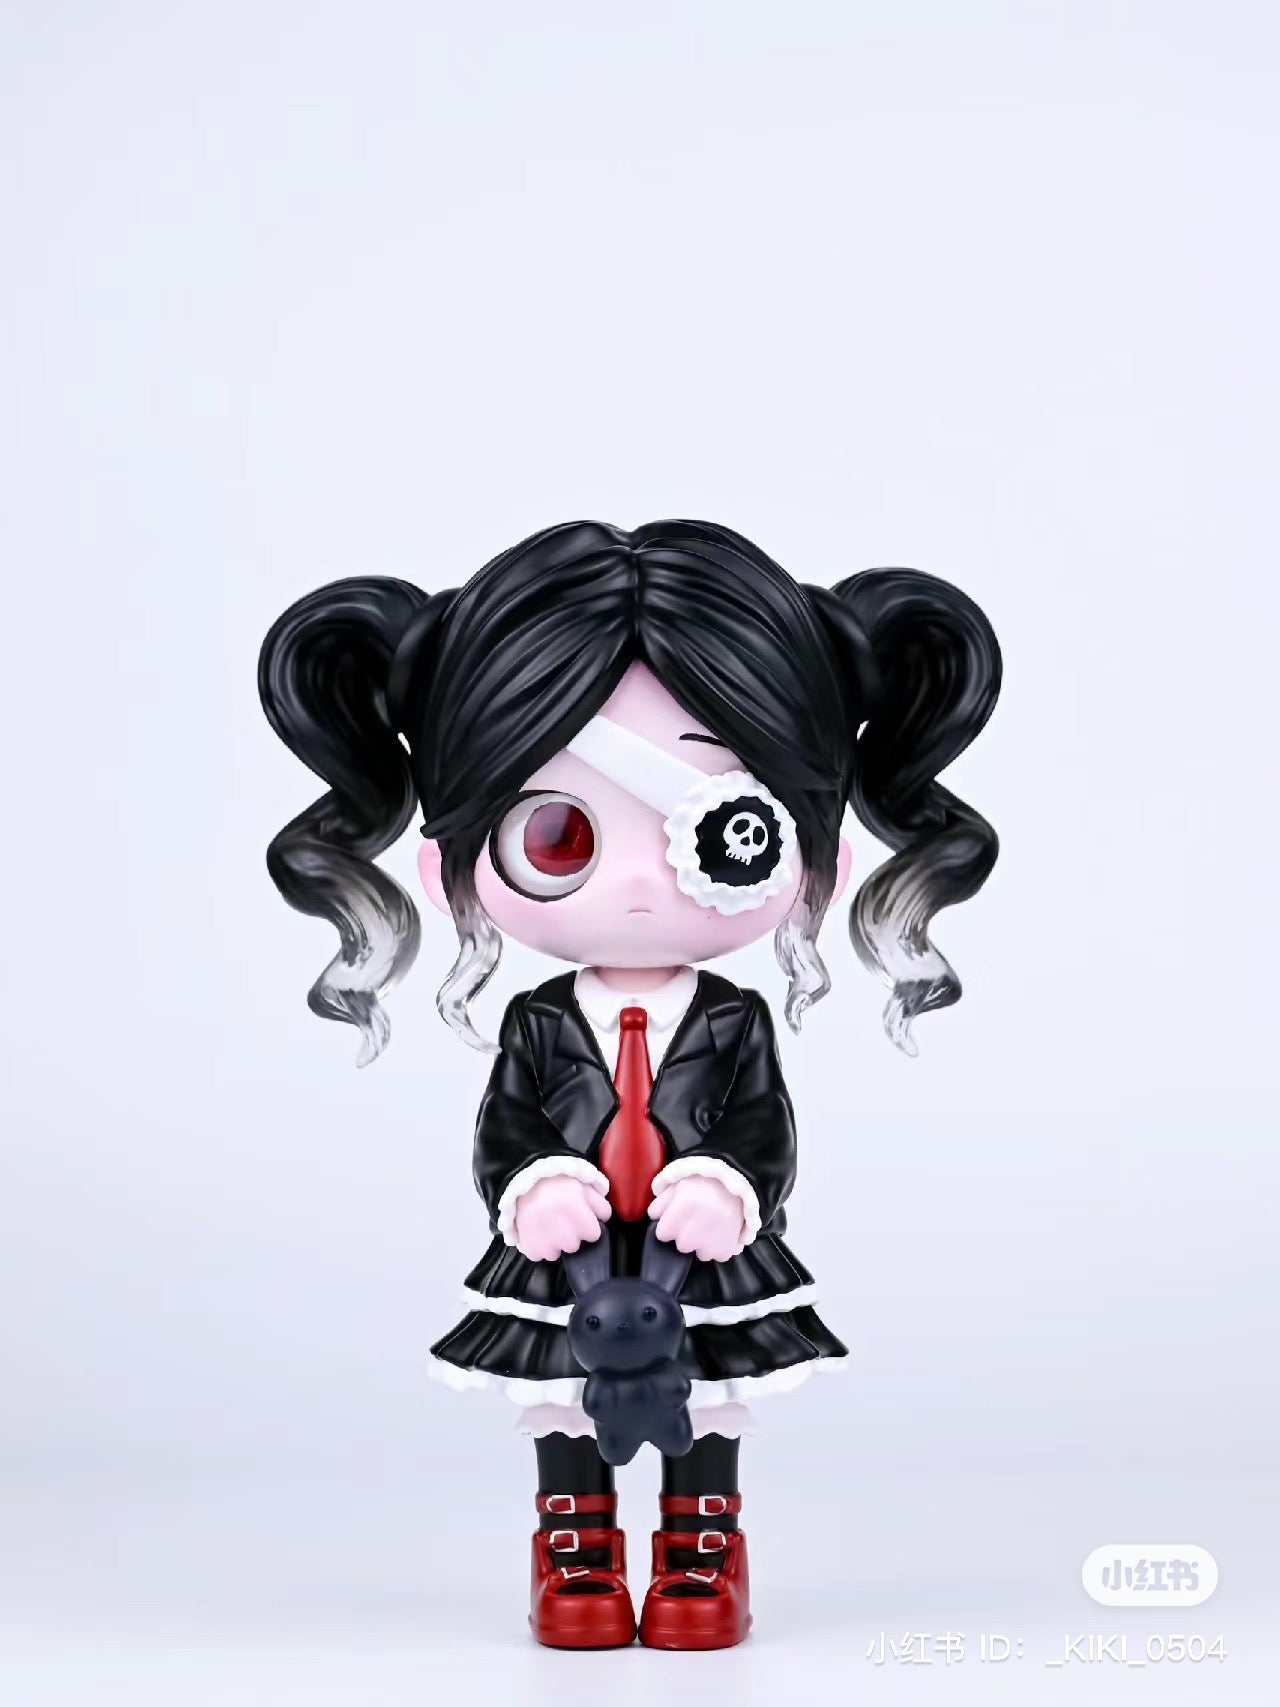 Kiki Girls 4.0 toy figurine: girl with pigtails, red tie, and eye patch, holding a rabbit. Resin/PVC, 11cm.